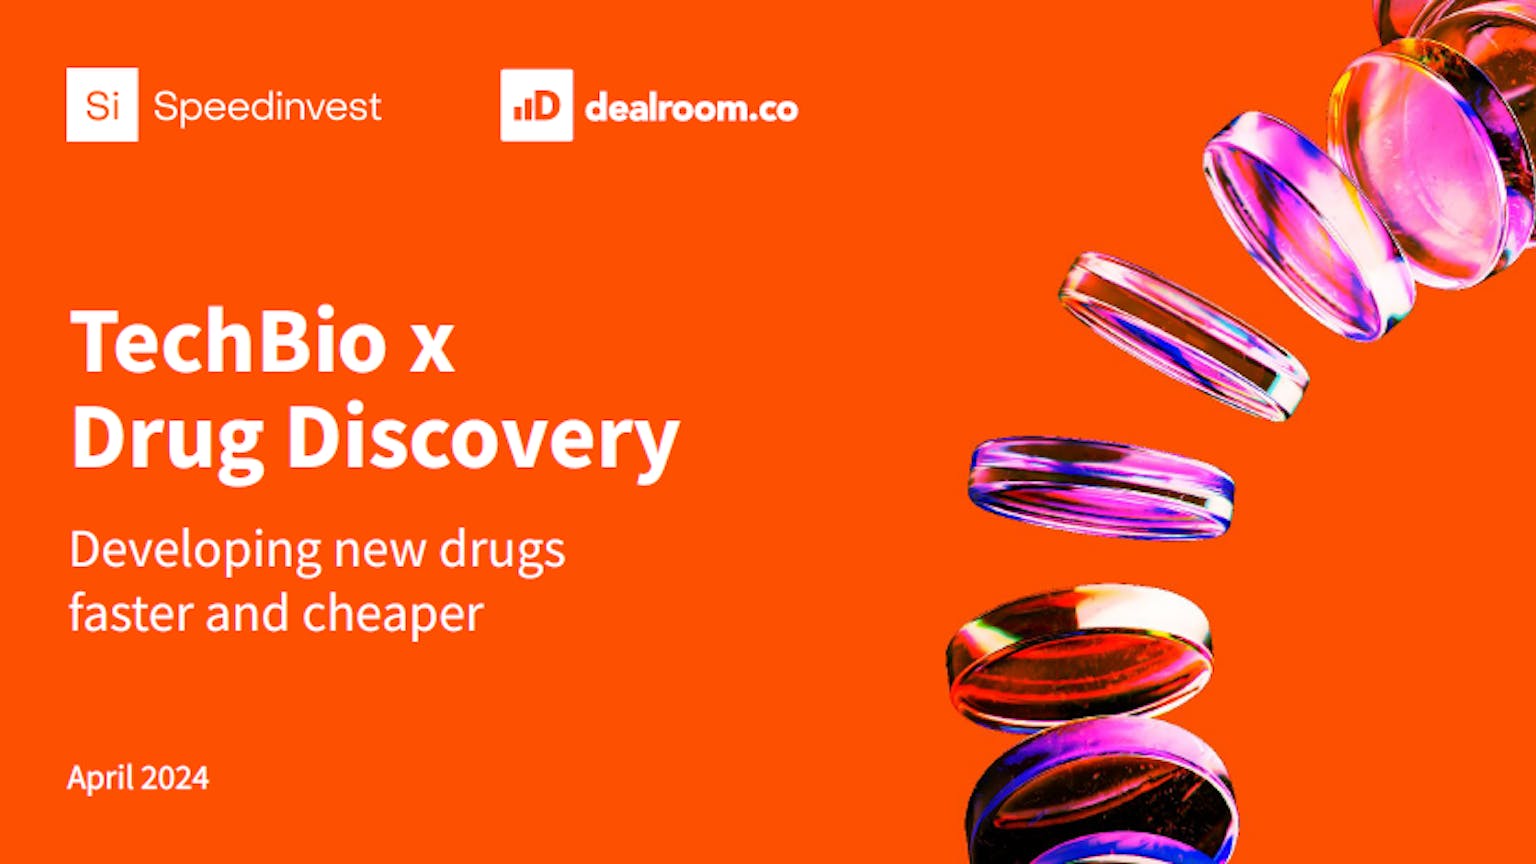 Techbio x Drug discovery report by Speedinvest and Dealroom